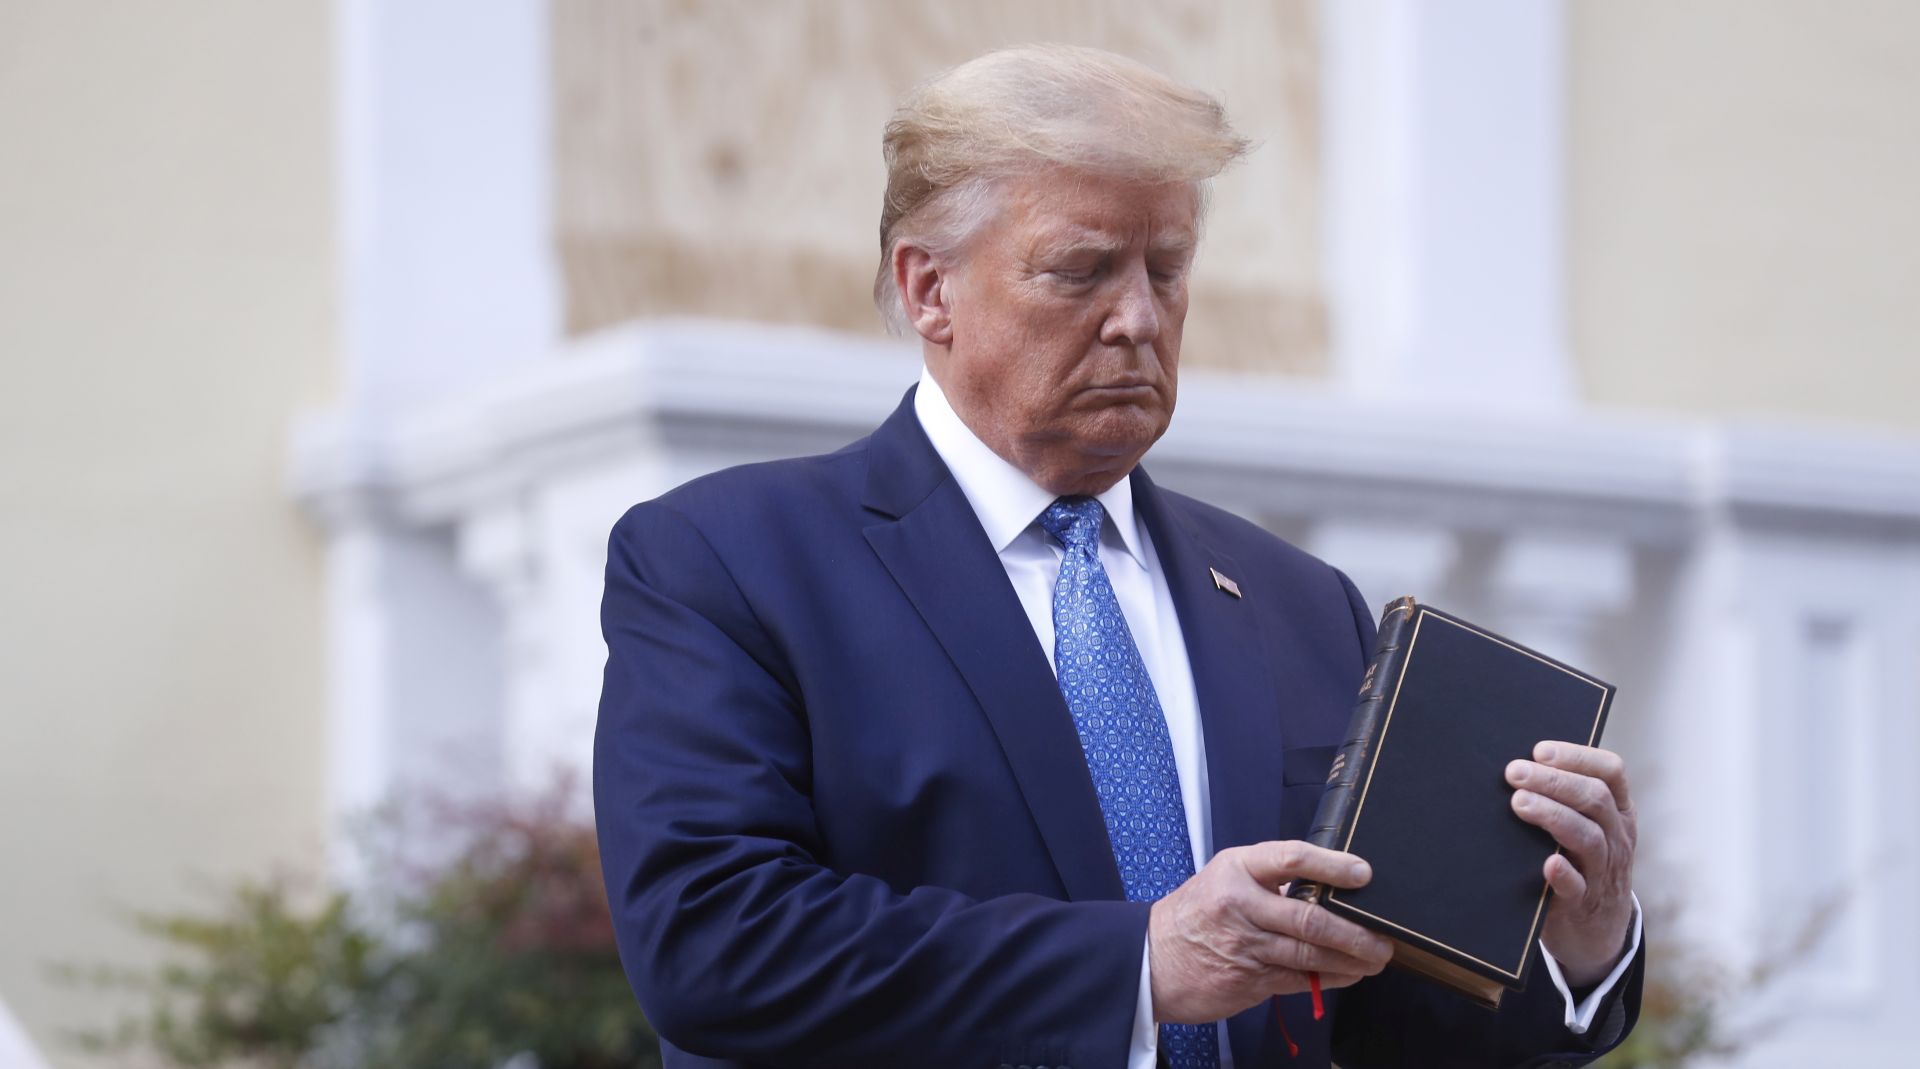 epa08459197 US President Donald J. Trump poses with a bible outside St. John's Episcopal Church after delivering remarks in the Rose Garden at the White House in Washington, DC, USA, 01 June 2020. Trump addressed the nationwide protests following the death of George Floyd in police custody.  EPA/SHAWN THEW